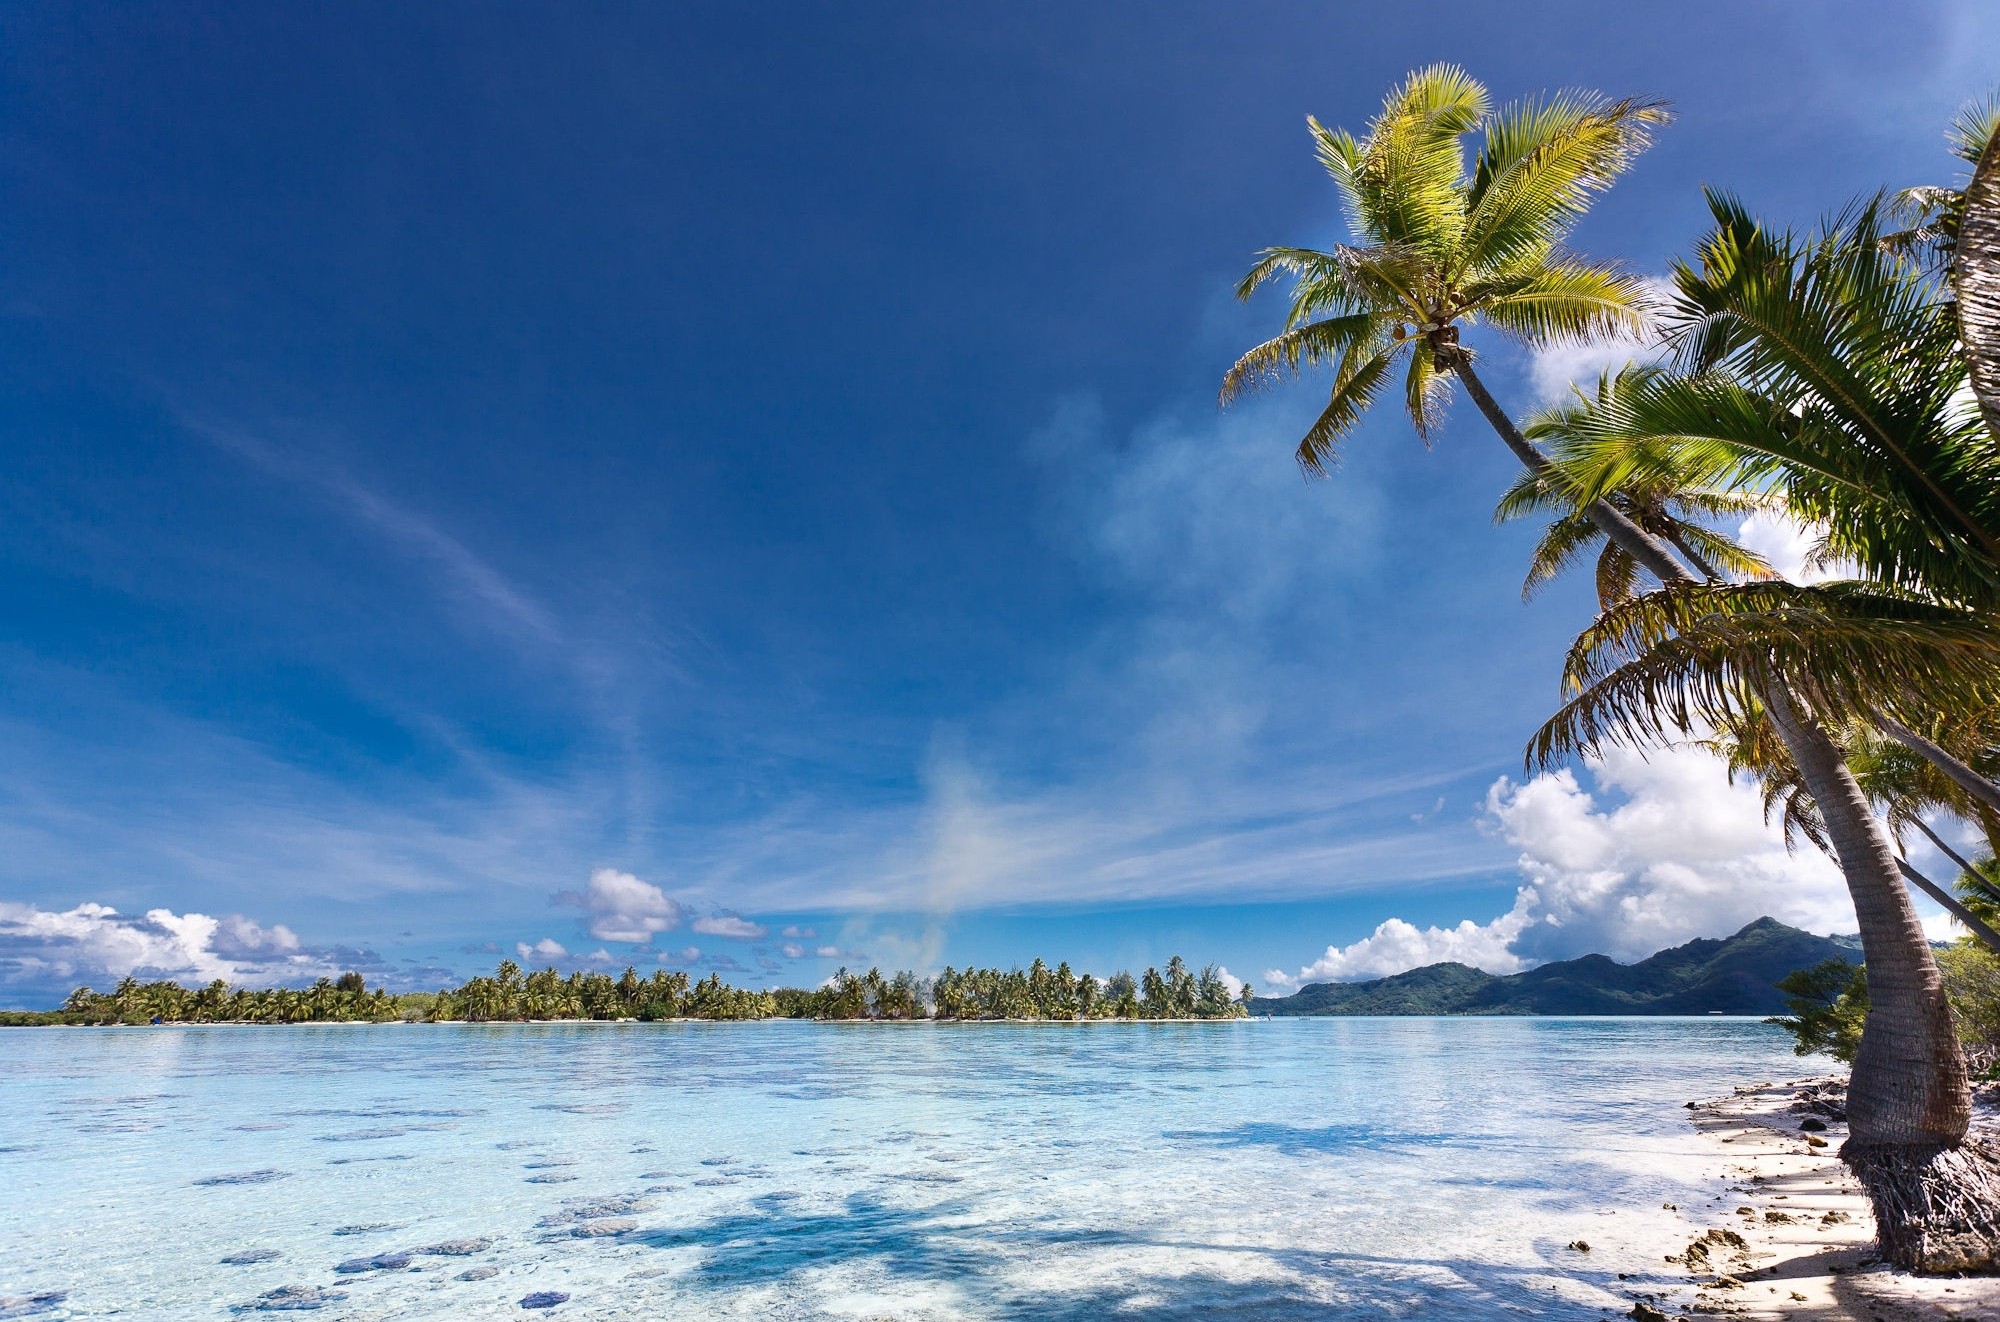 General 2000x1322 landscape nature beach palm trees island sea tropical Eden mountains summer French Polynesia